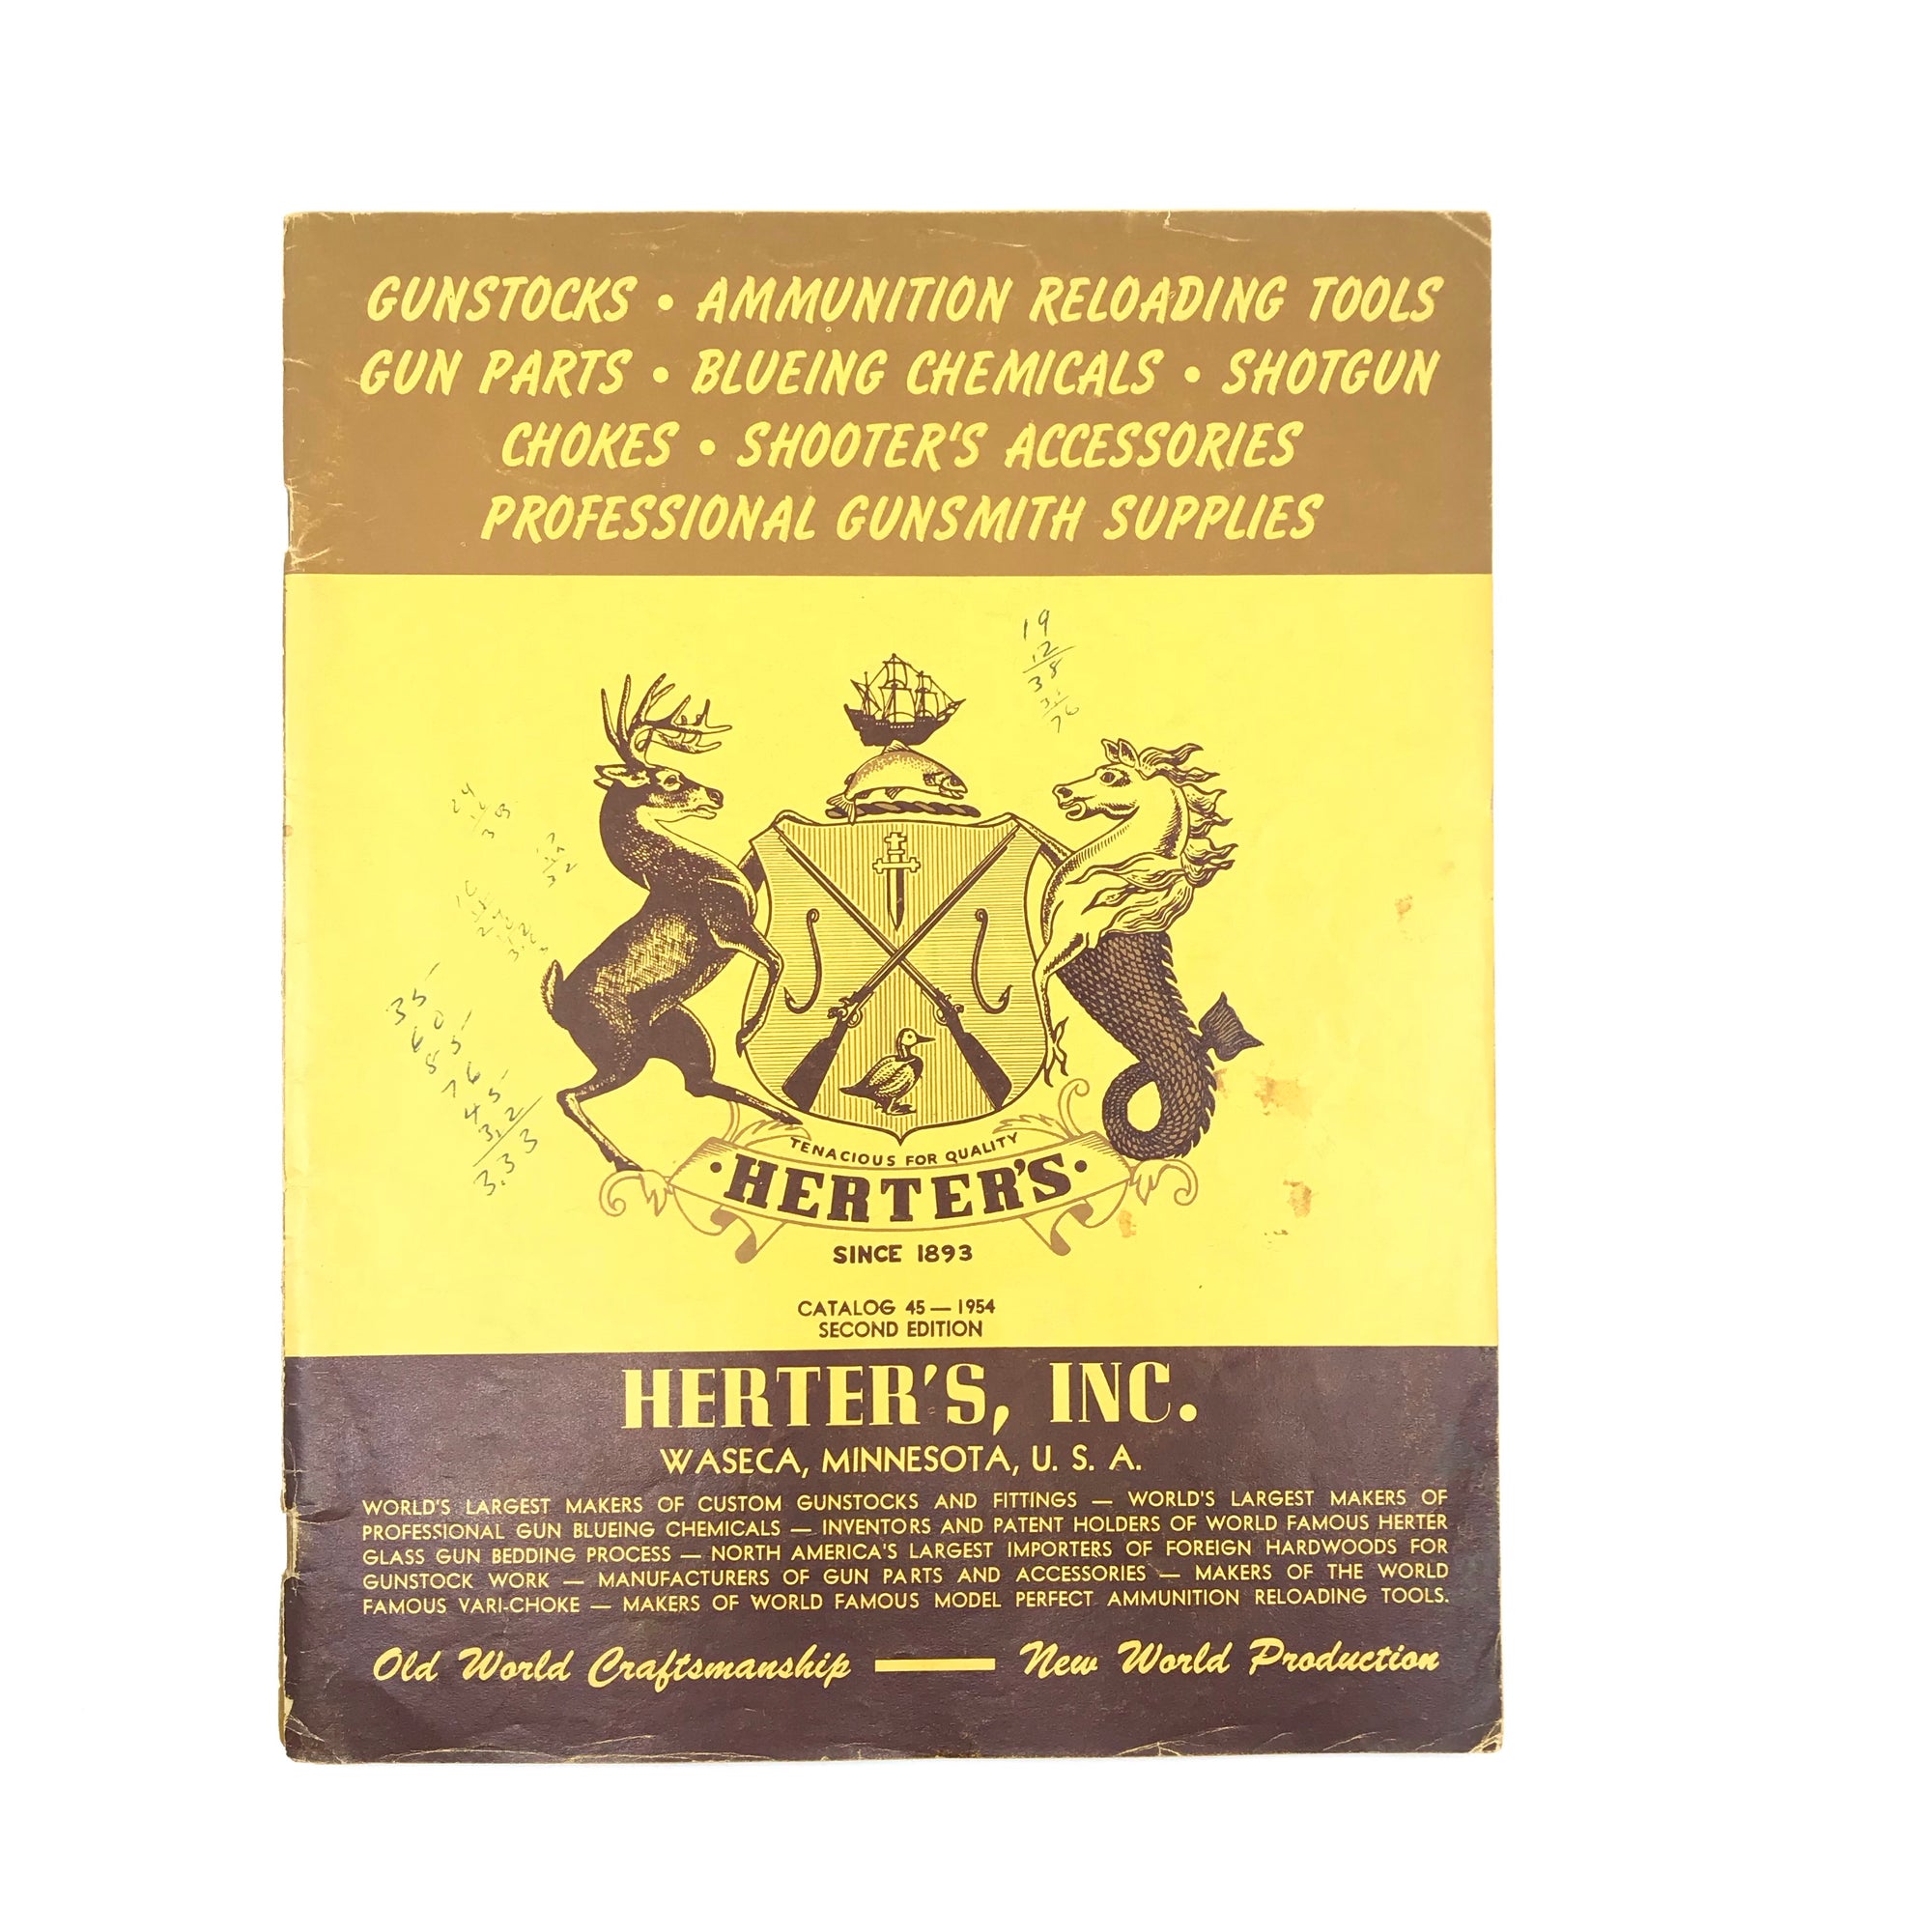 Herters Catalogues 1979 & 1954